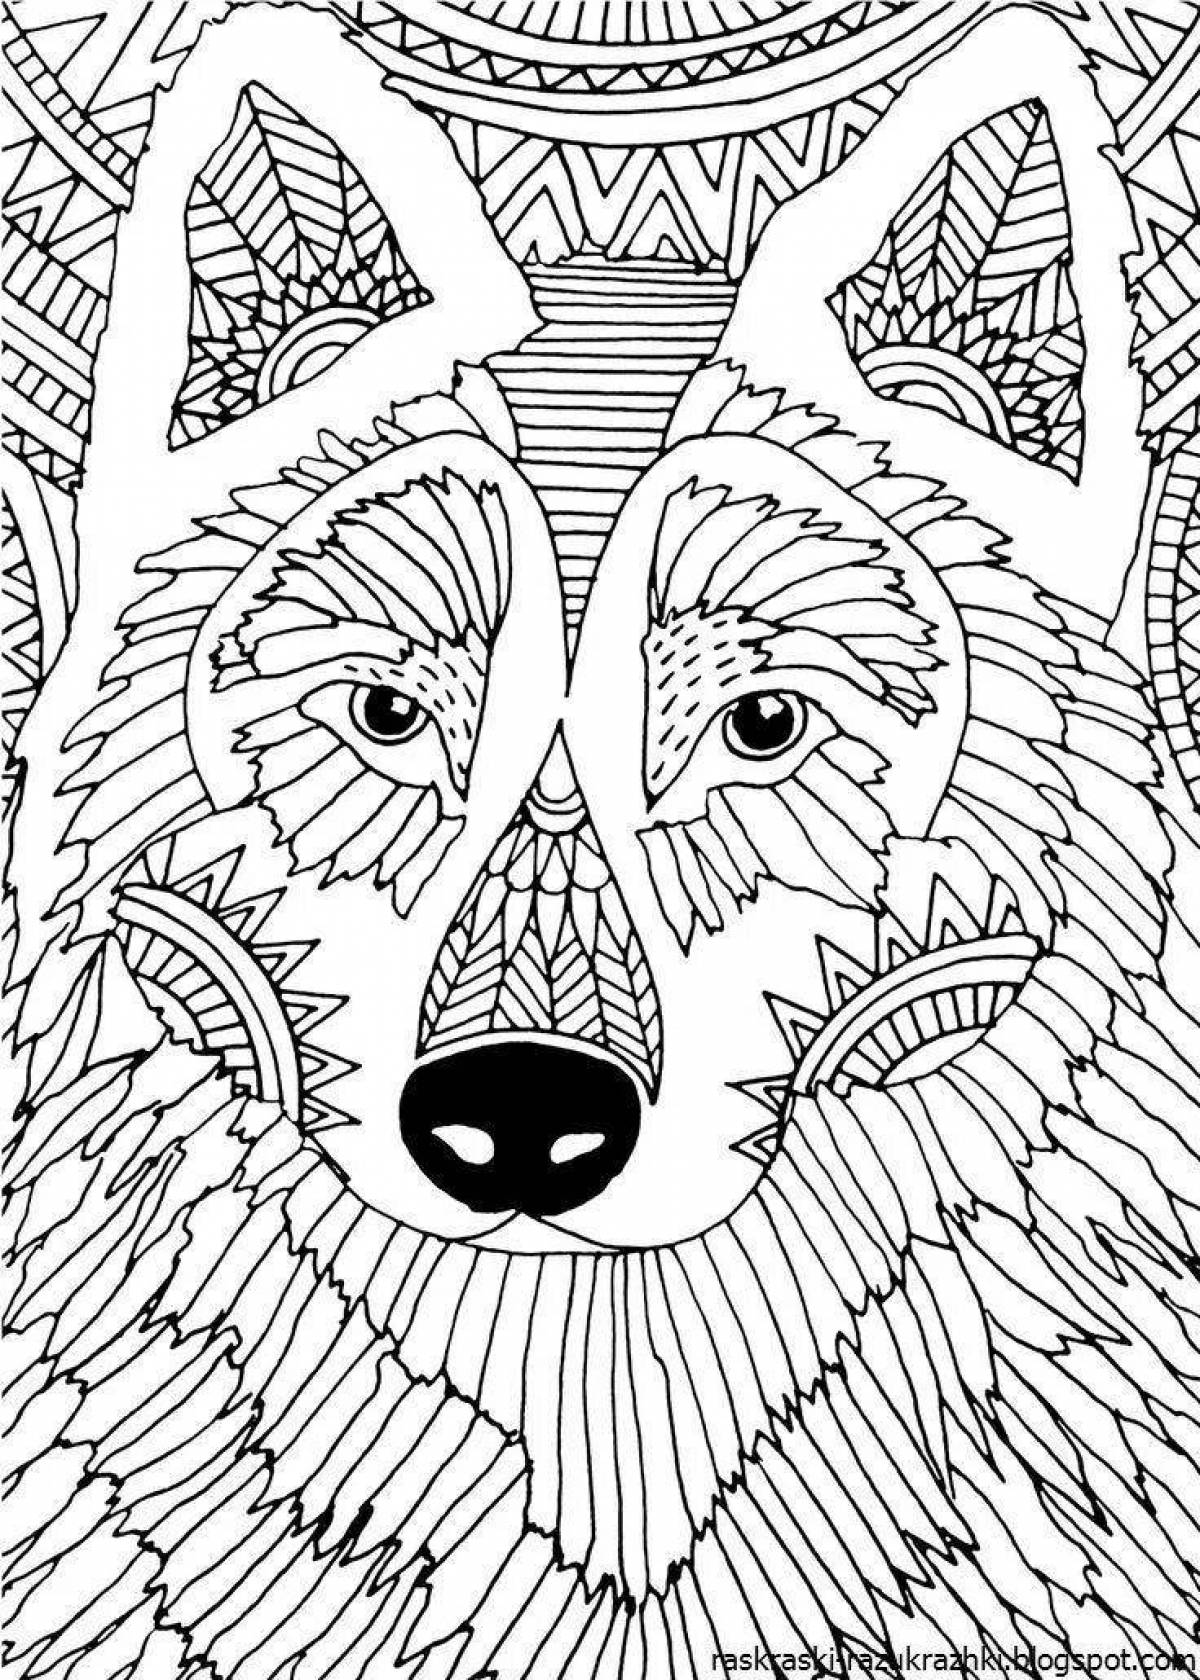 A fun anti-stress coloring book for adults